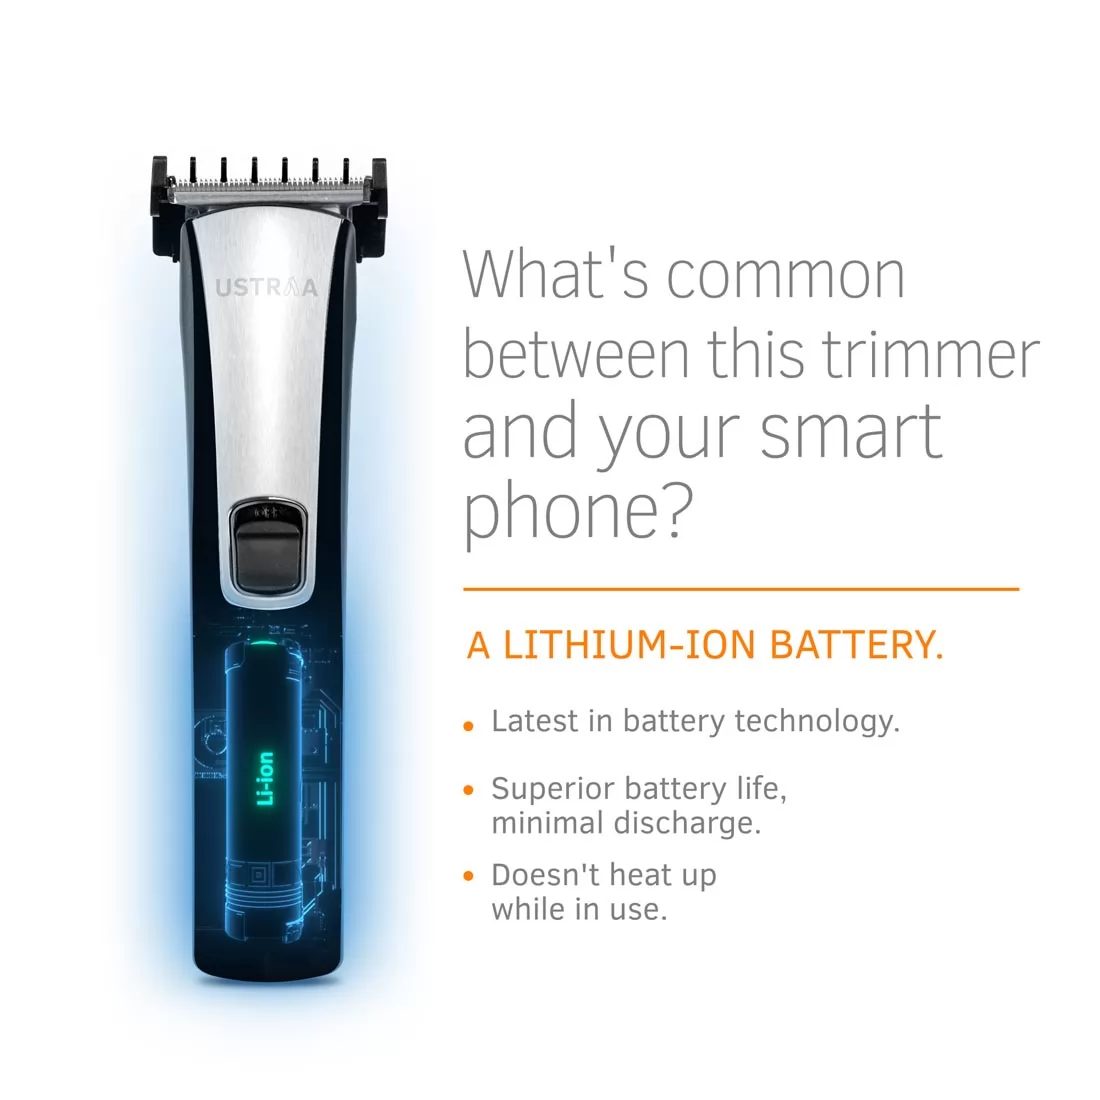 ustraa trimmer charger